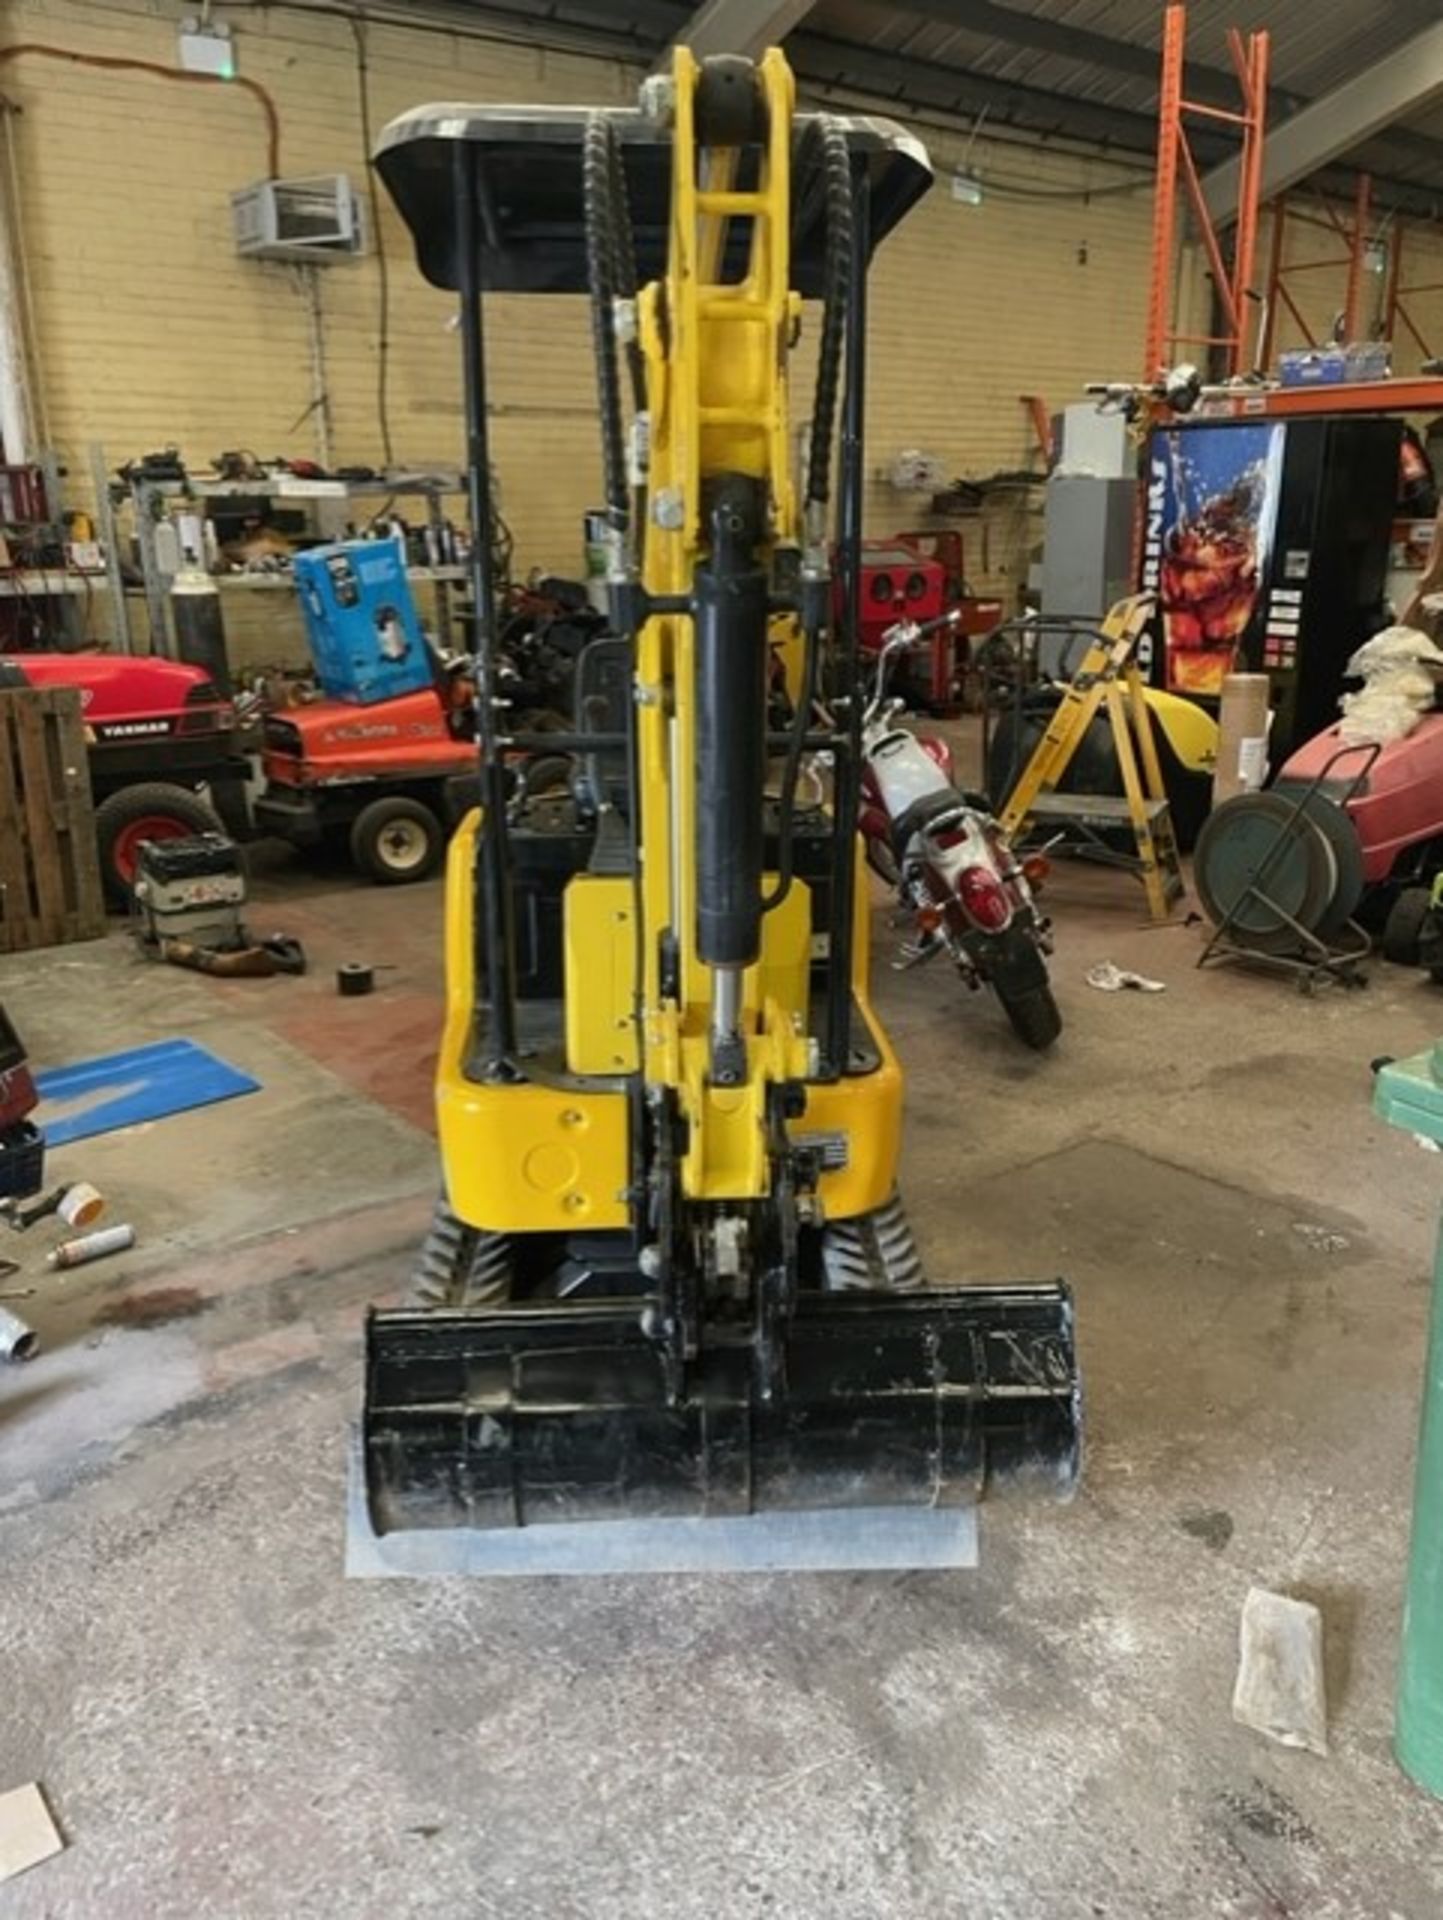 Rippa 1 ton excavator sweet little runner yanmar engine also hydraulics smooth for a little